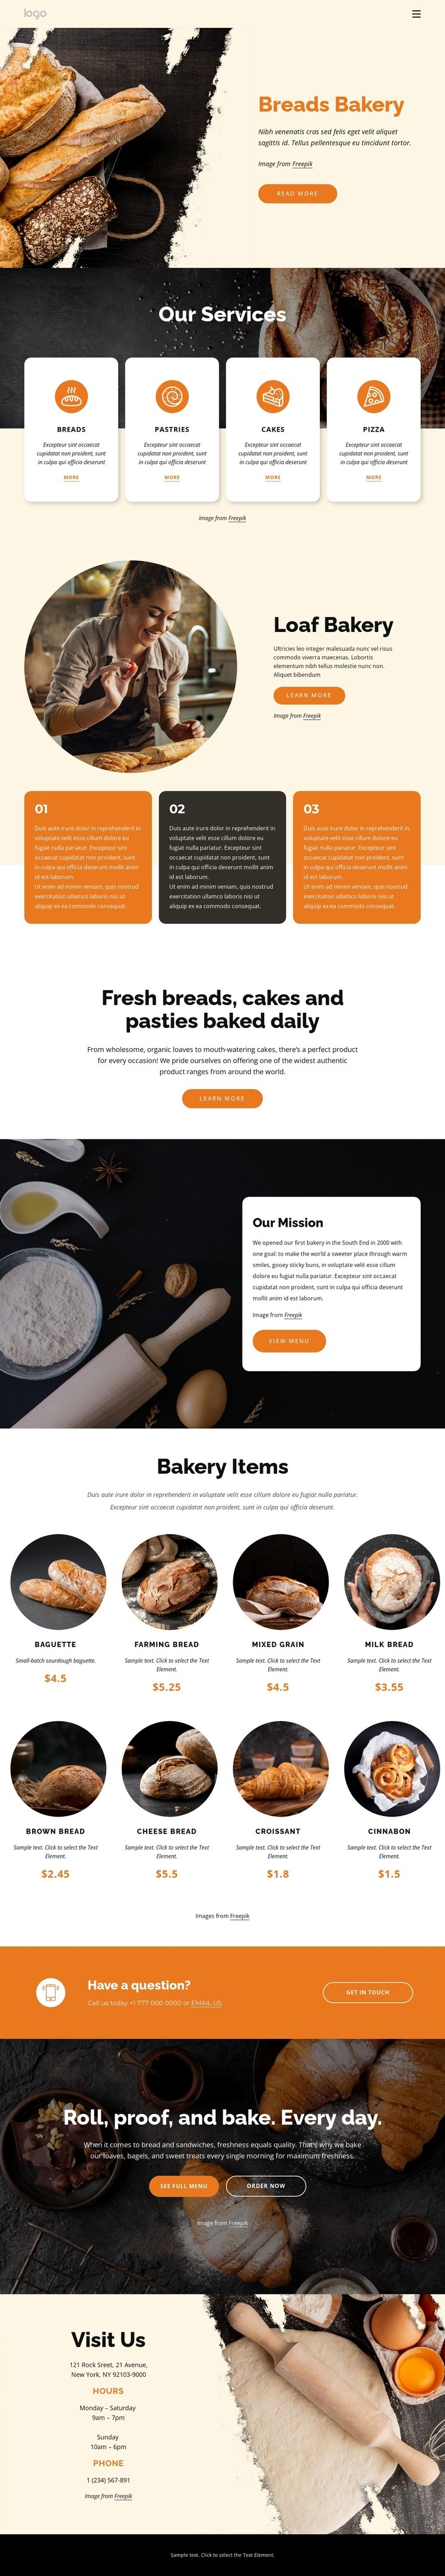 Breads bakery Homepage Design